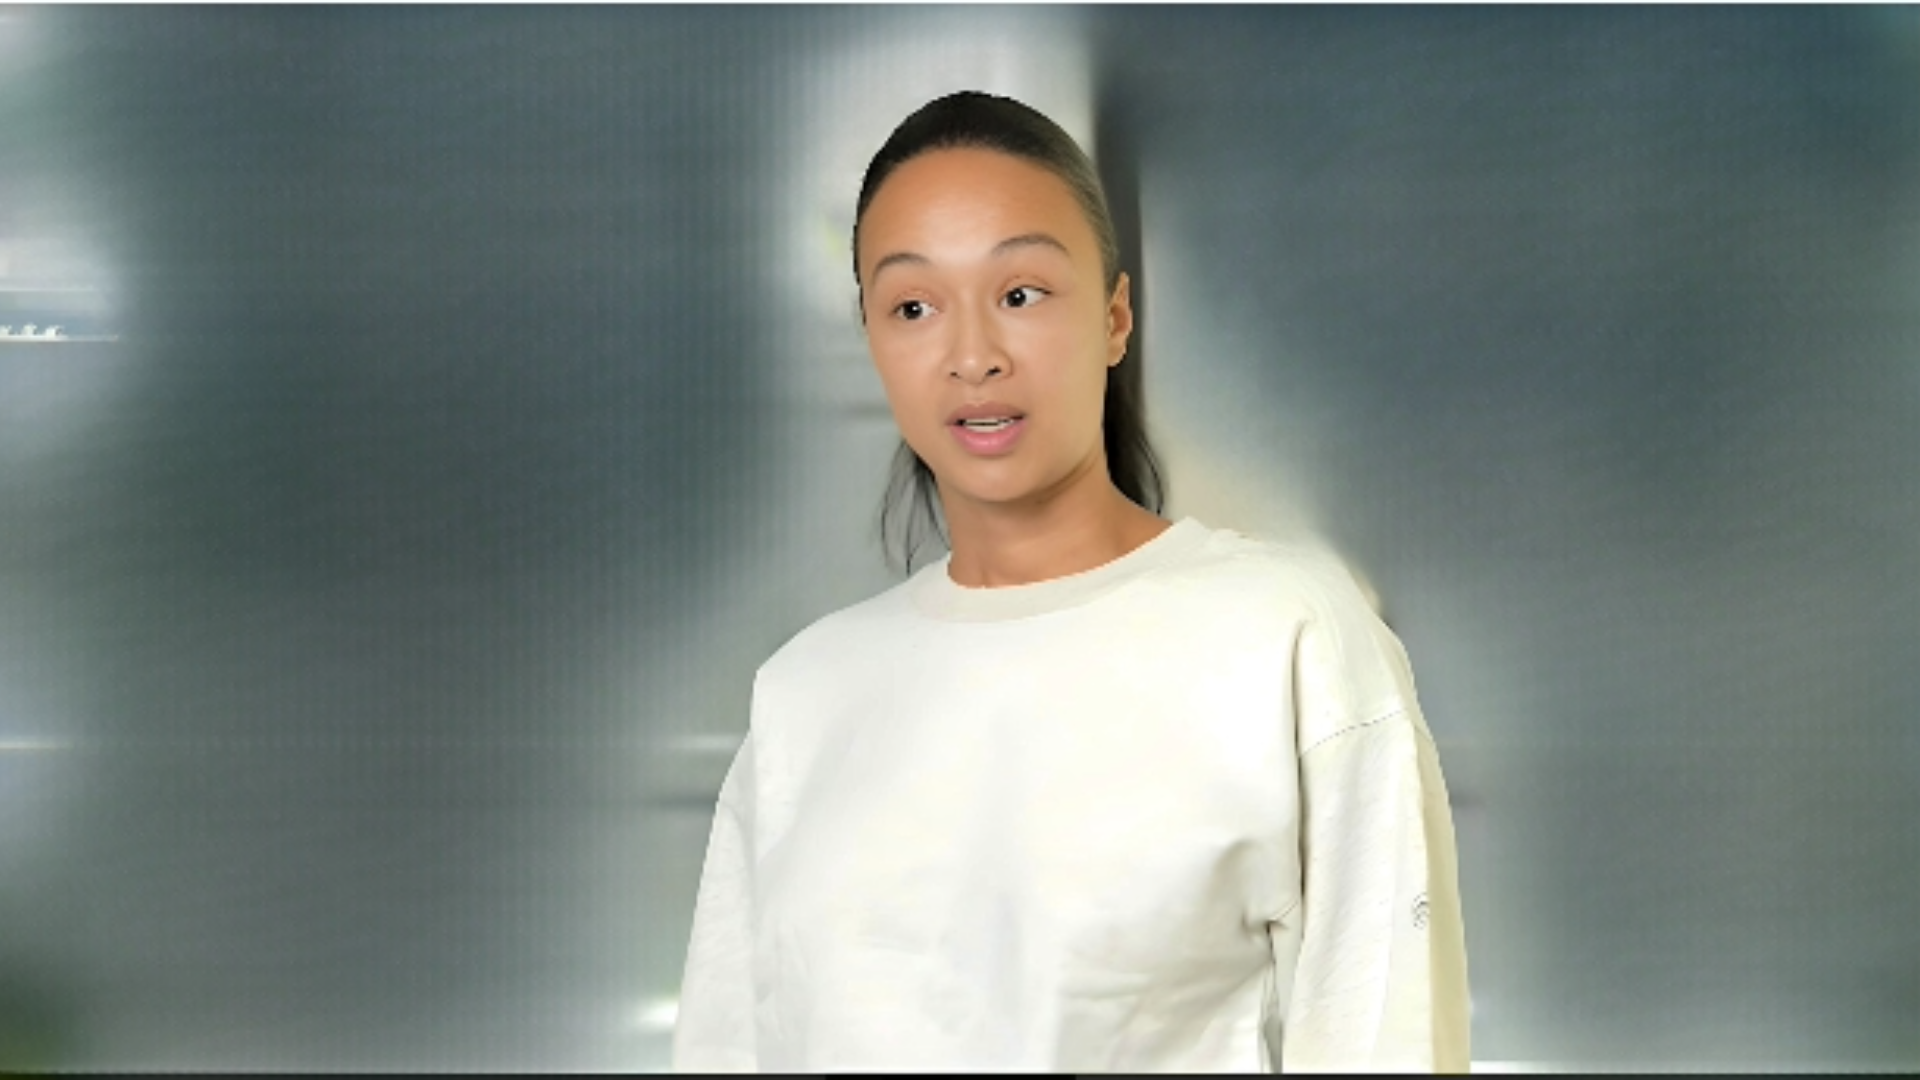 Draya Michele Net Worth: How Rich Is She? Beautiful picture in white shirt.